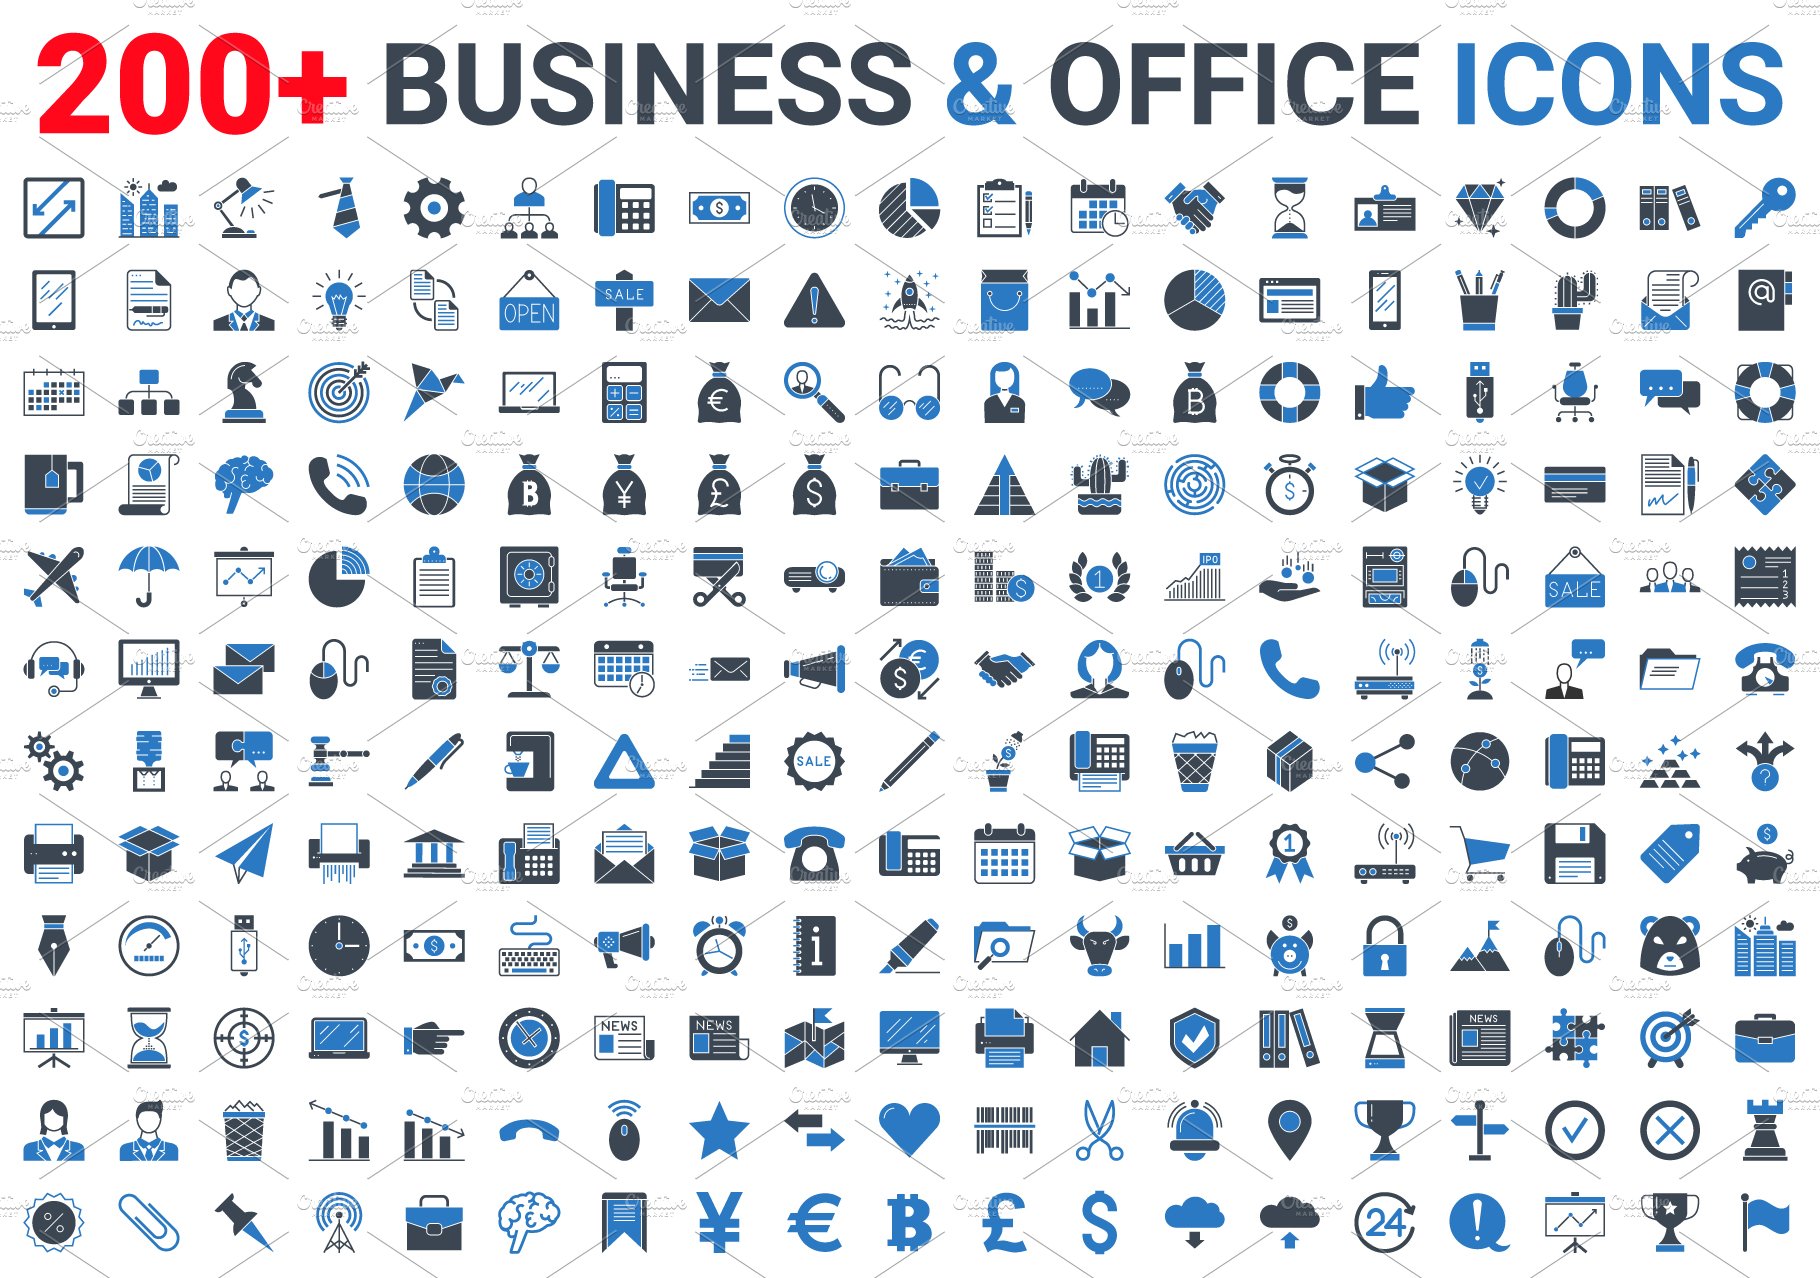 Business Banking Finance Icons cover image.